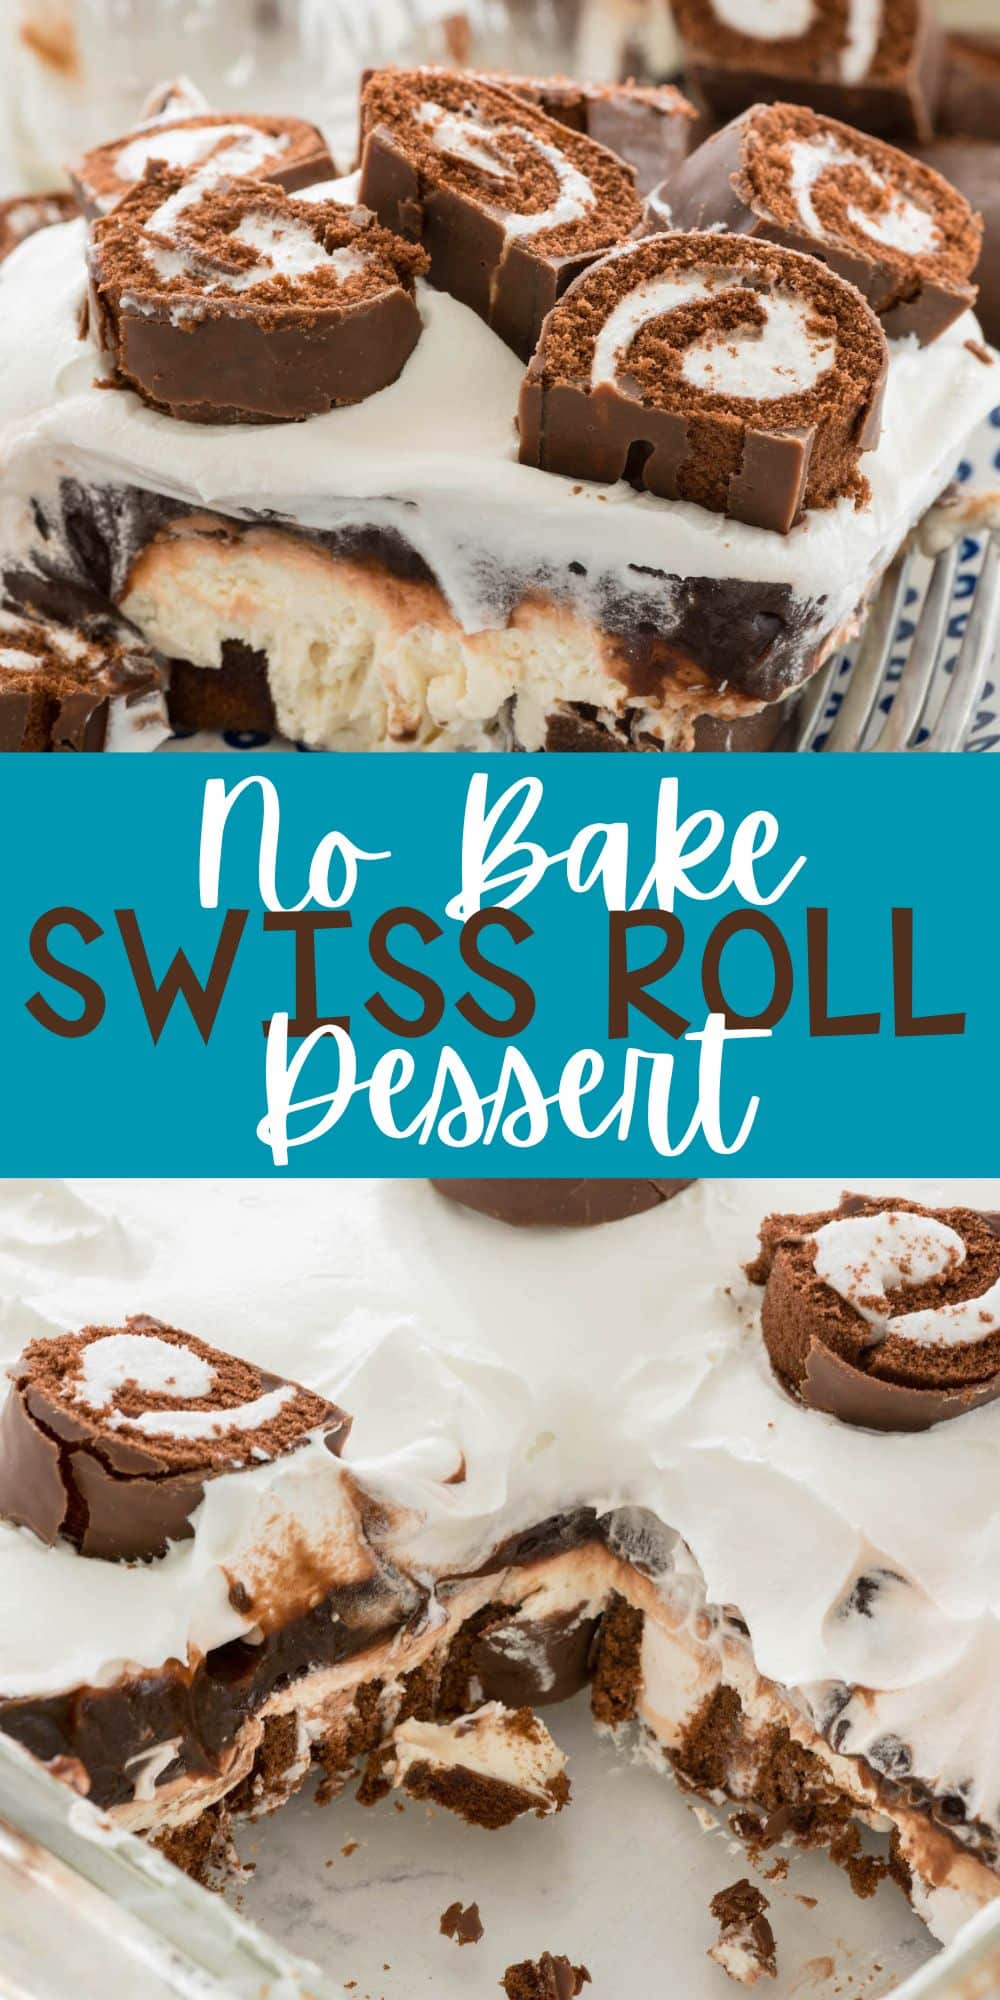 two photos of Swiss roll dessert on a plate next to a fork with sliced Swiss rolls on top with words on the image.